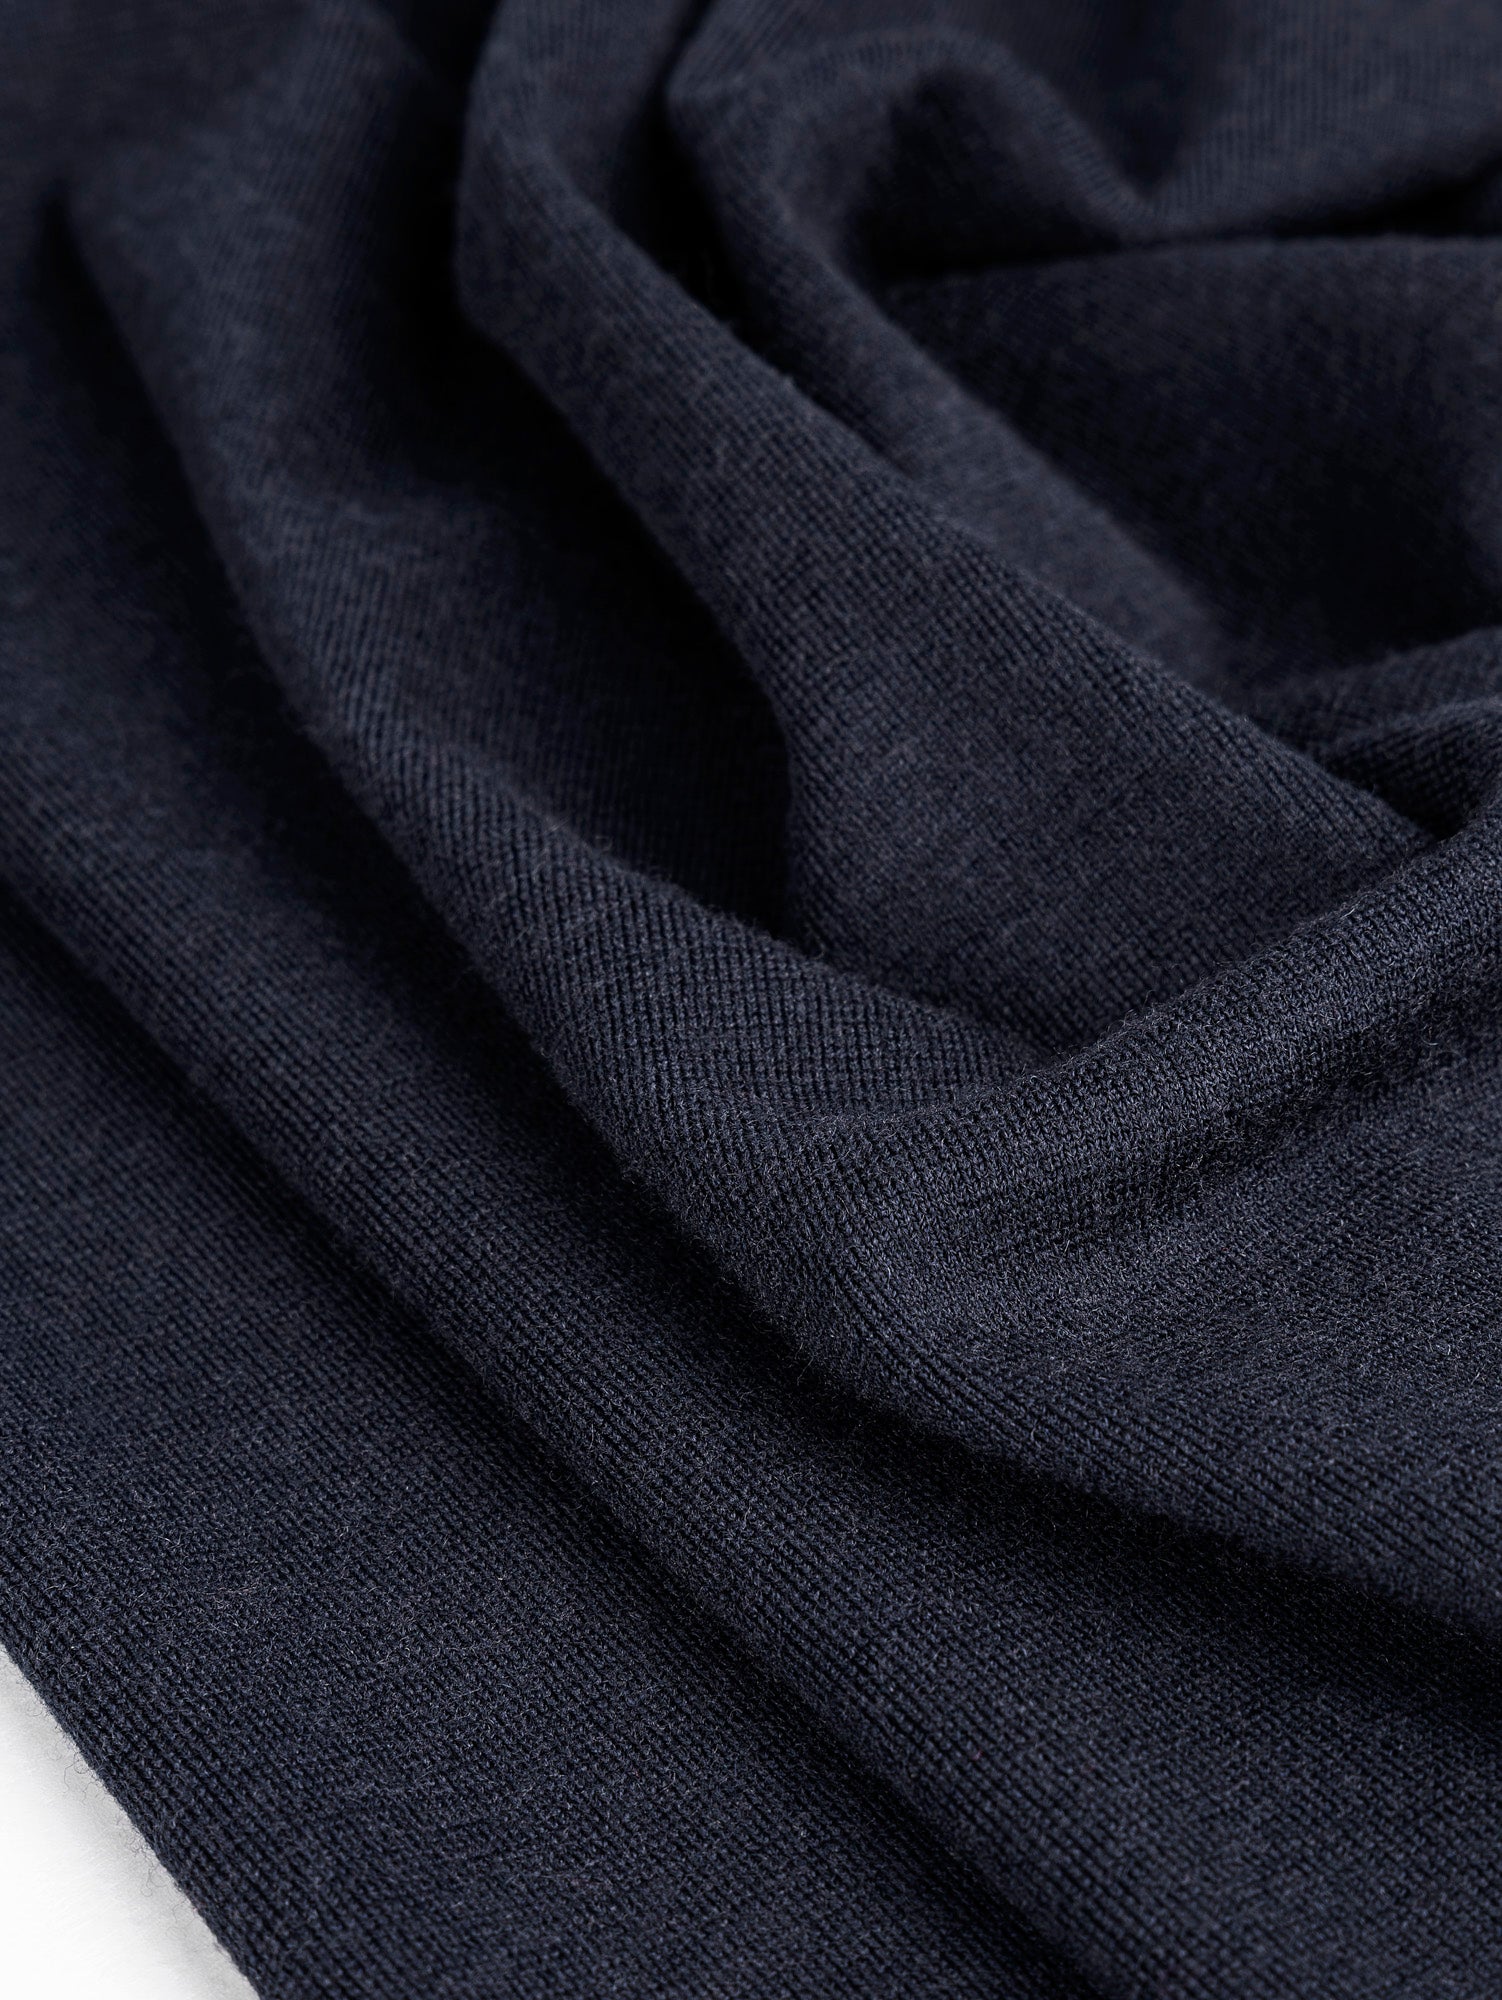 Void Black-Gray Wool Blend Textured Double Knit Fabric – Fashion